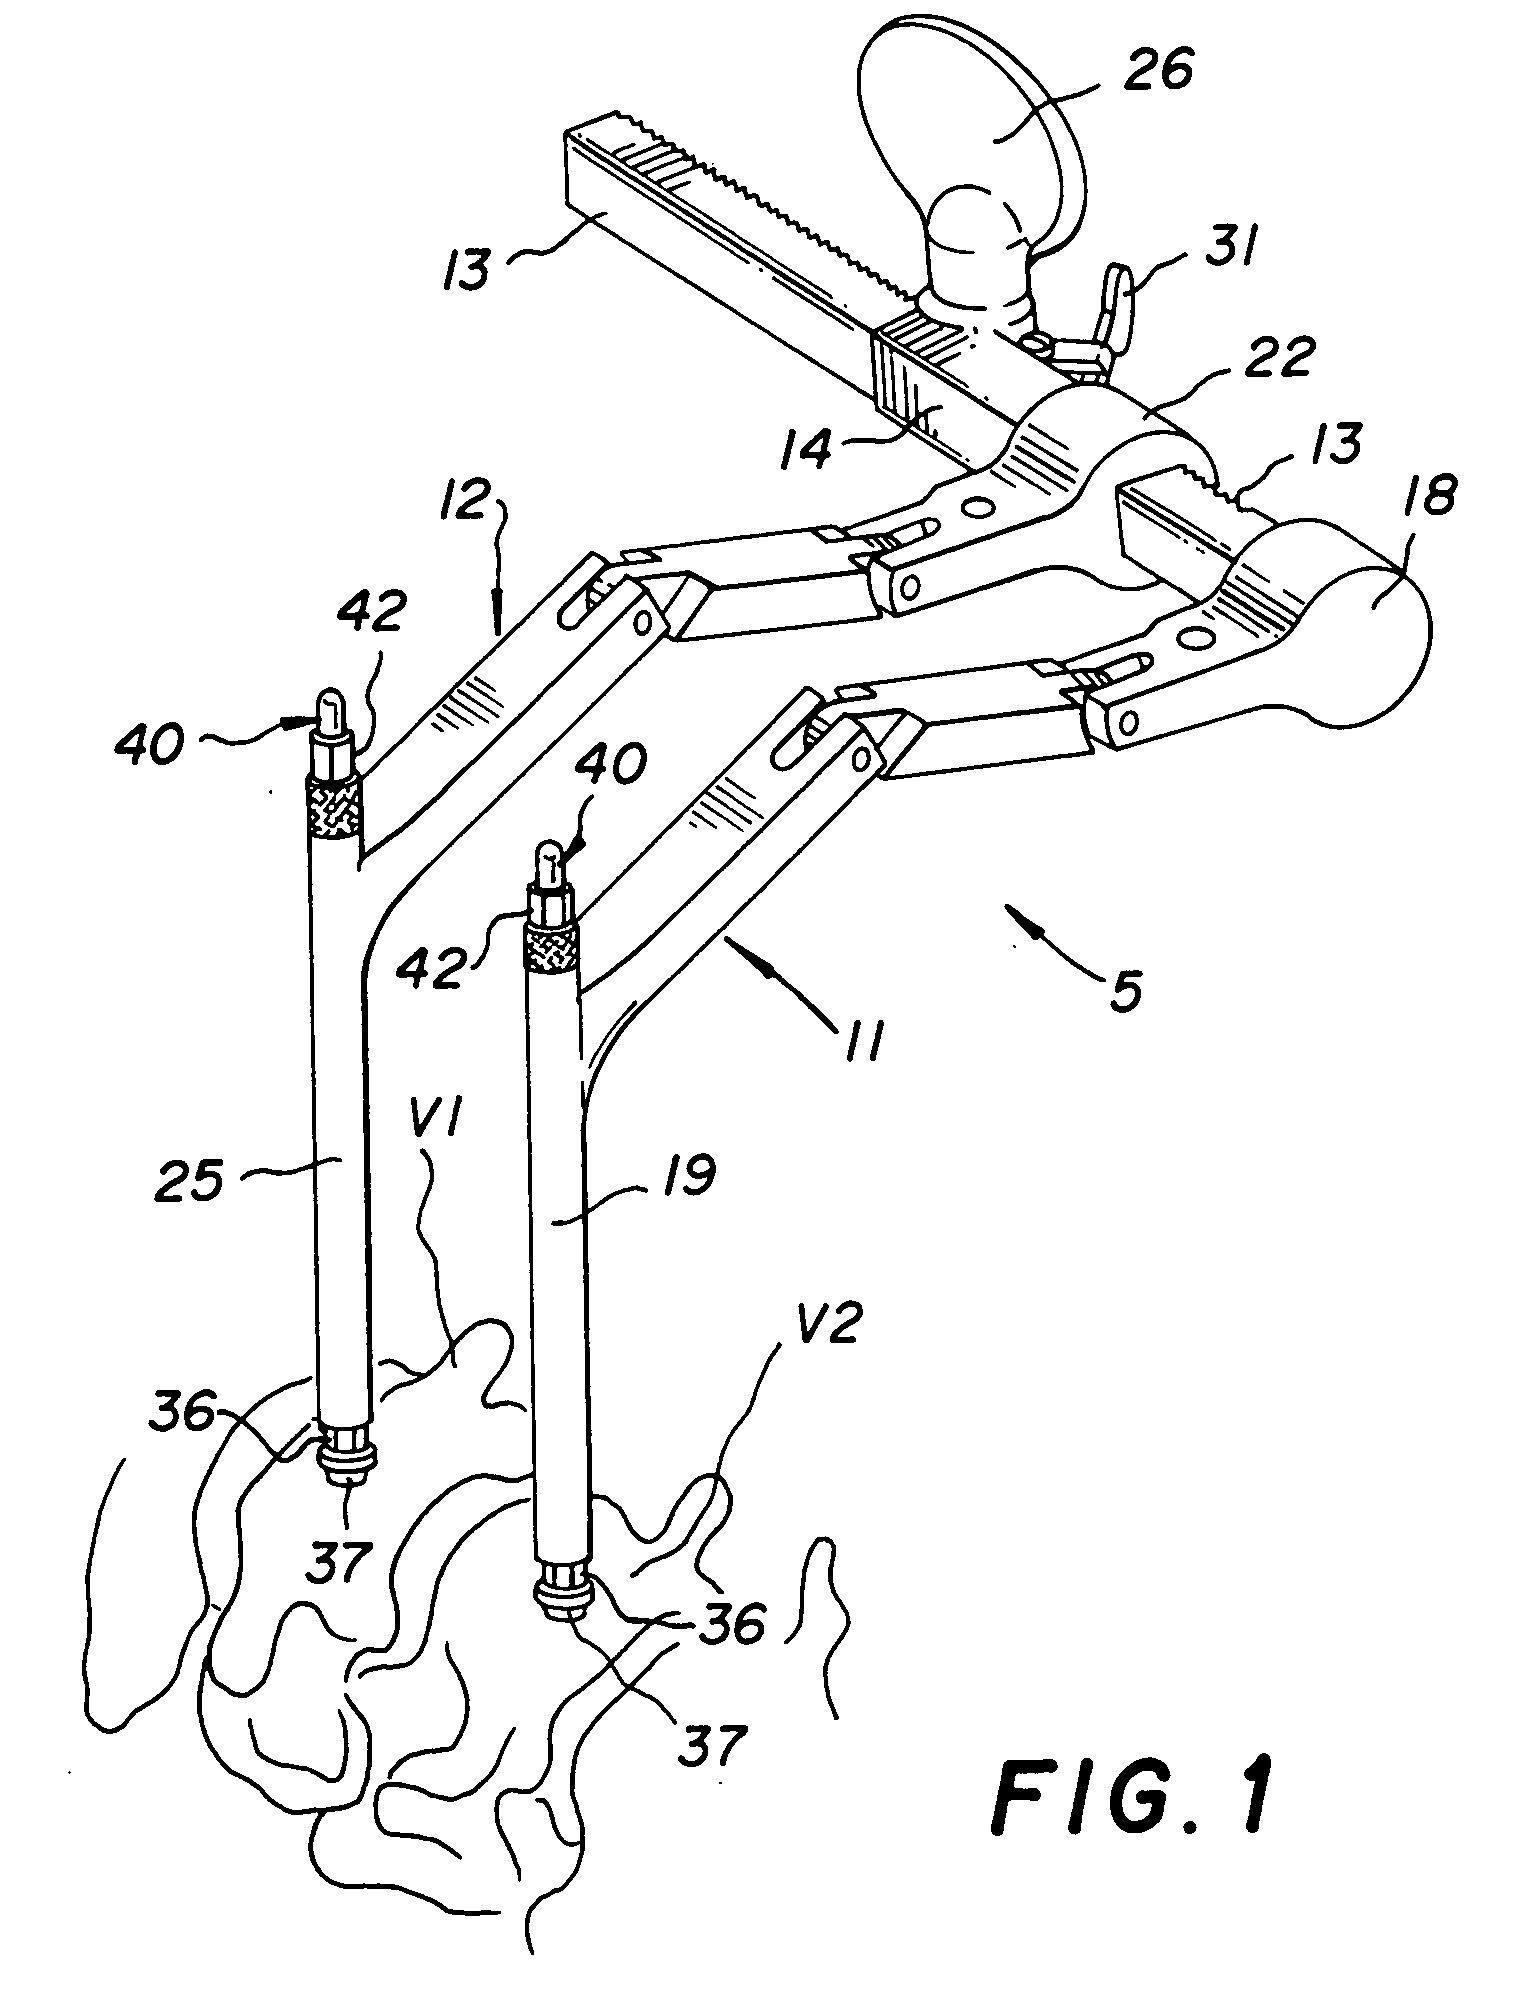 Vertebral retainer-distracter and method of using same